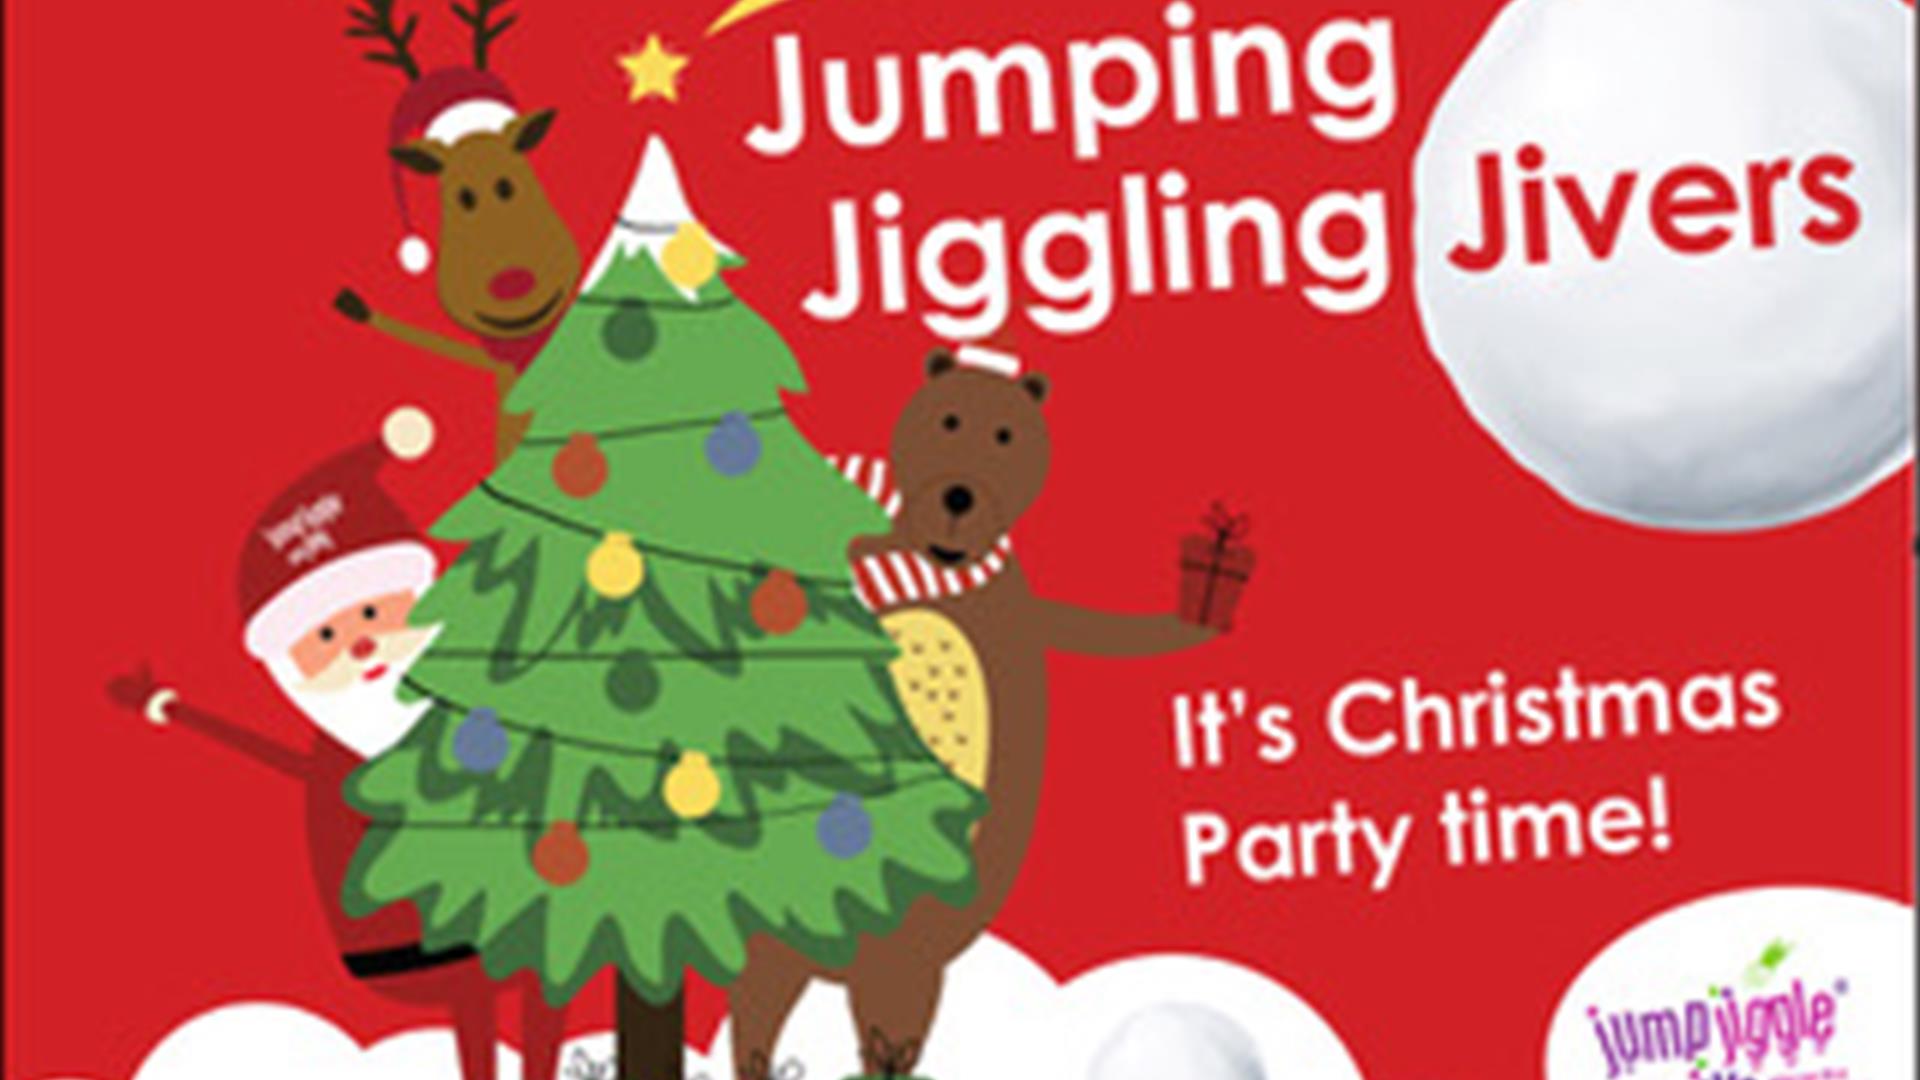 Poster with Jumping, JIggling & Jiffers - its Christmas Party Time